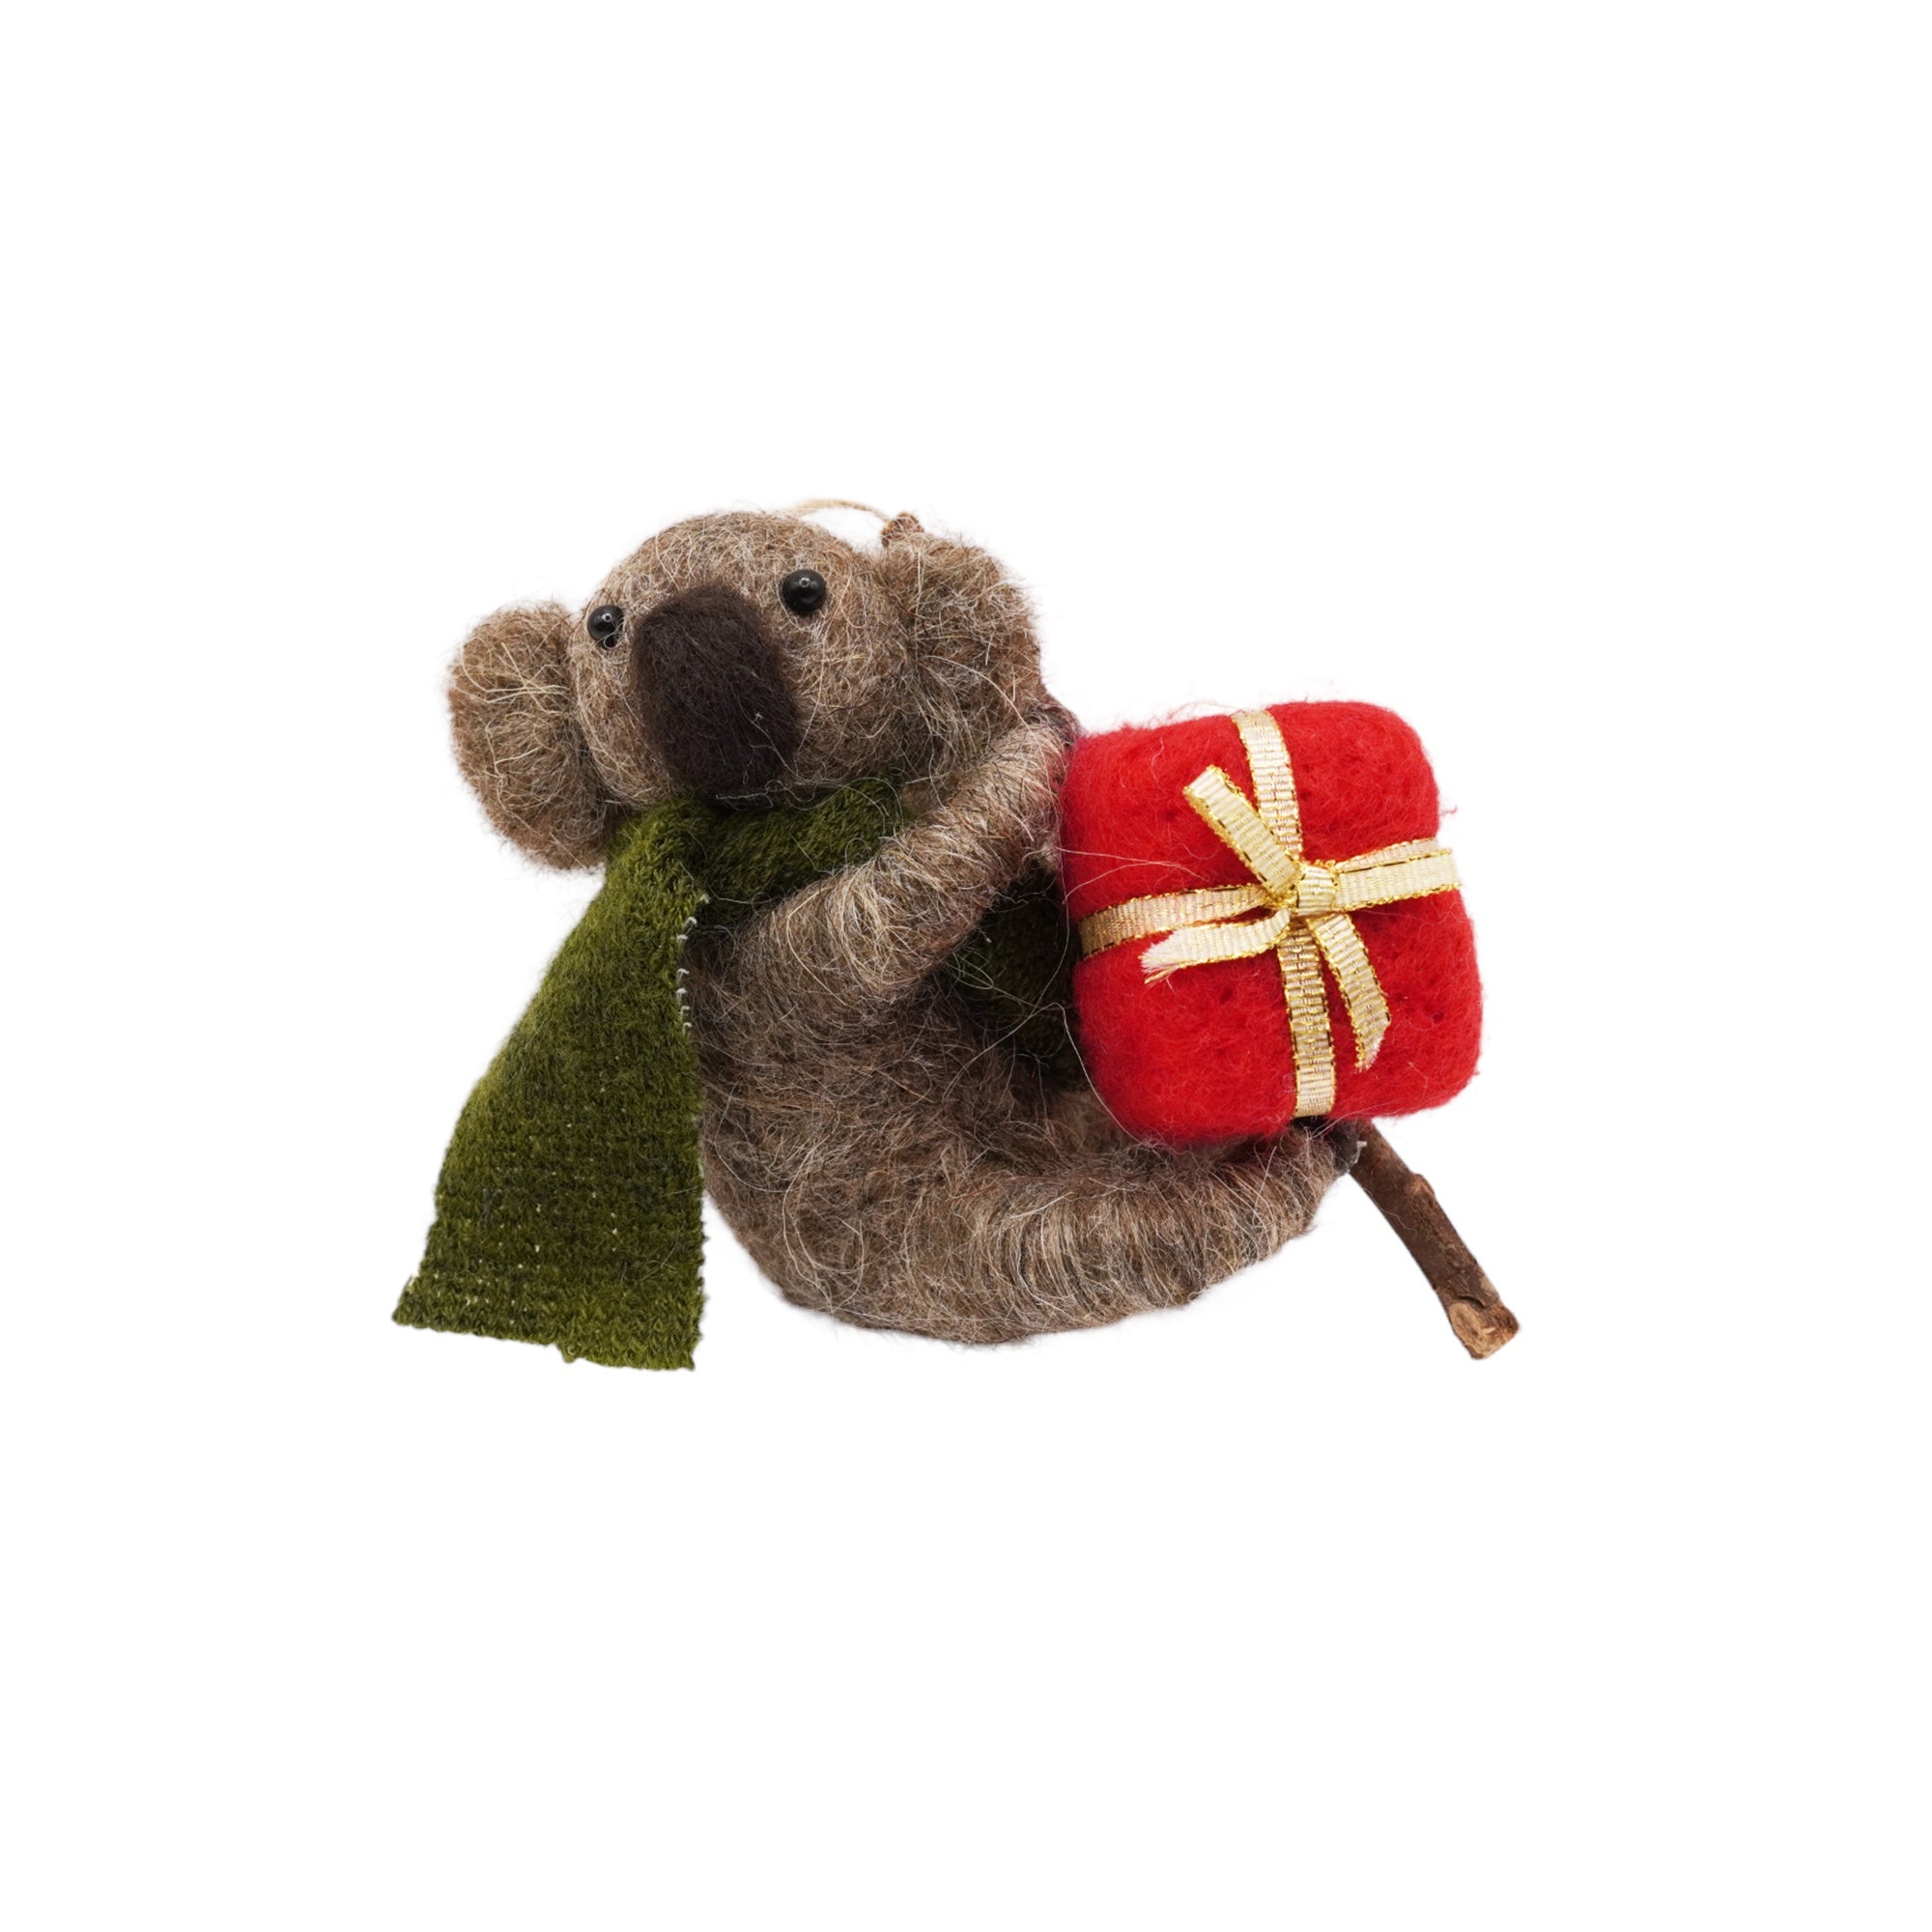 Koala Ornament Smores Koala Christmas Ornament Unique Koala Gifts with Year  Hang Tag Comes in a Gift Box - Safari Best Friends Furry Animal Ornament 